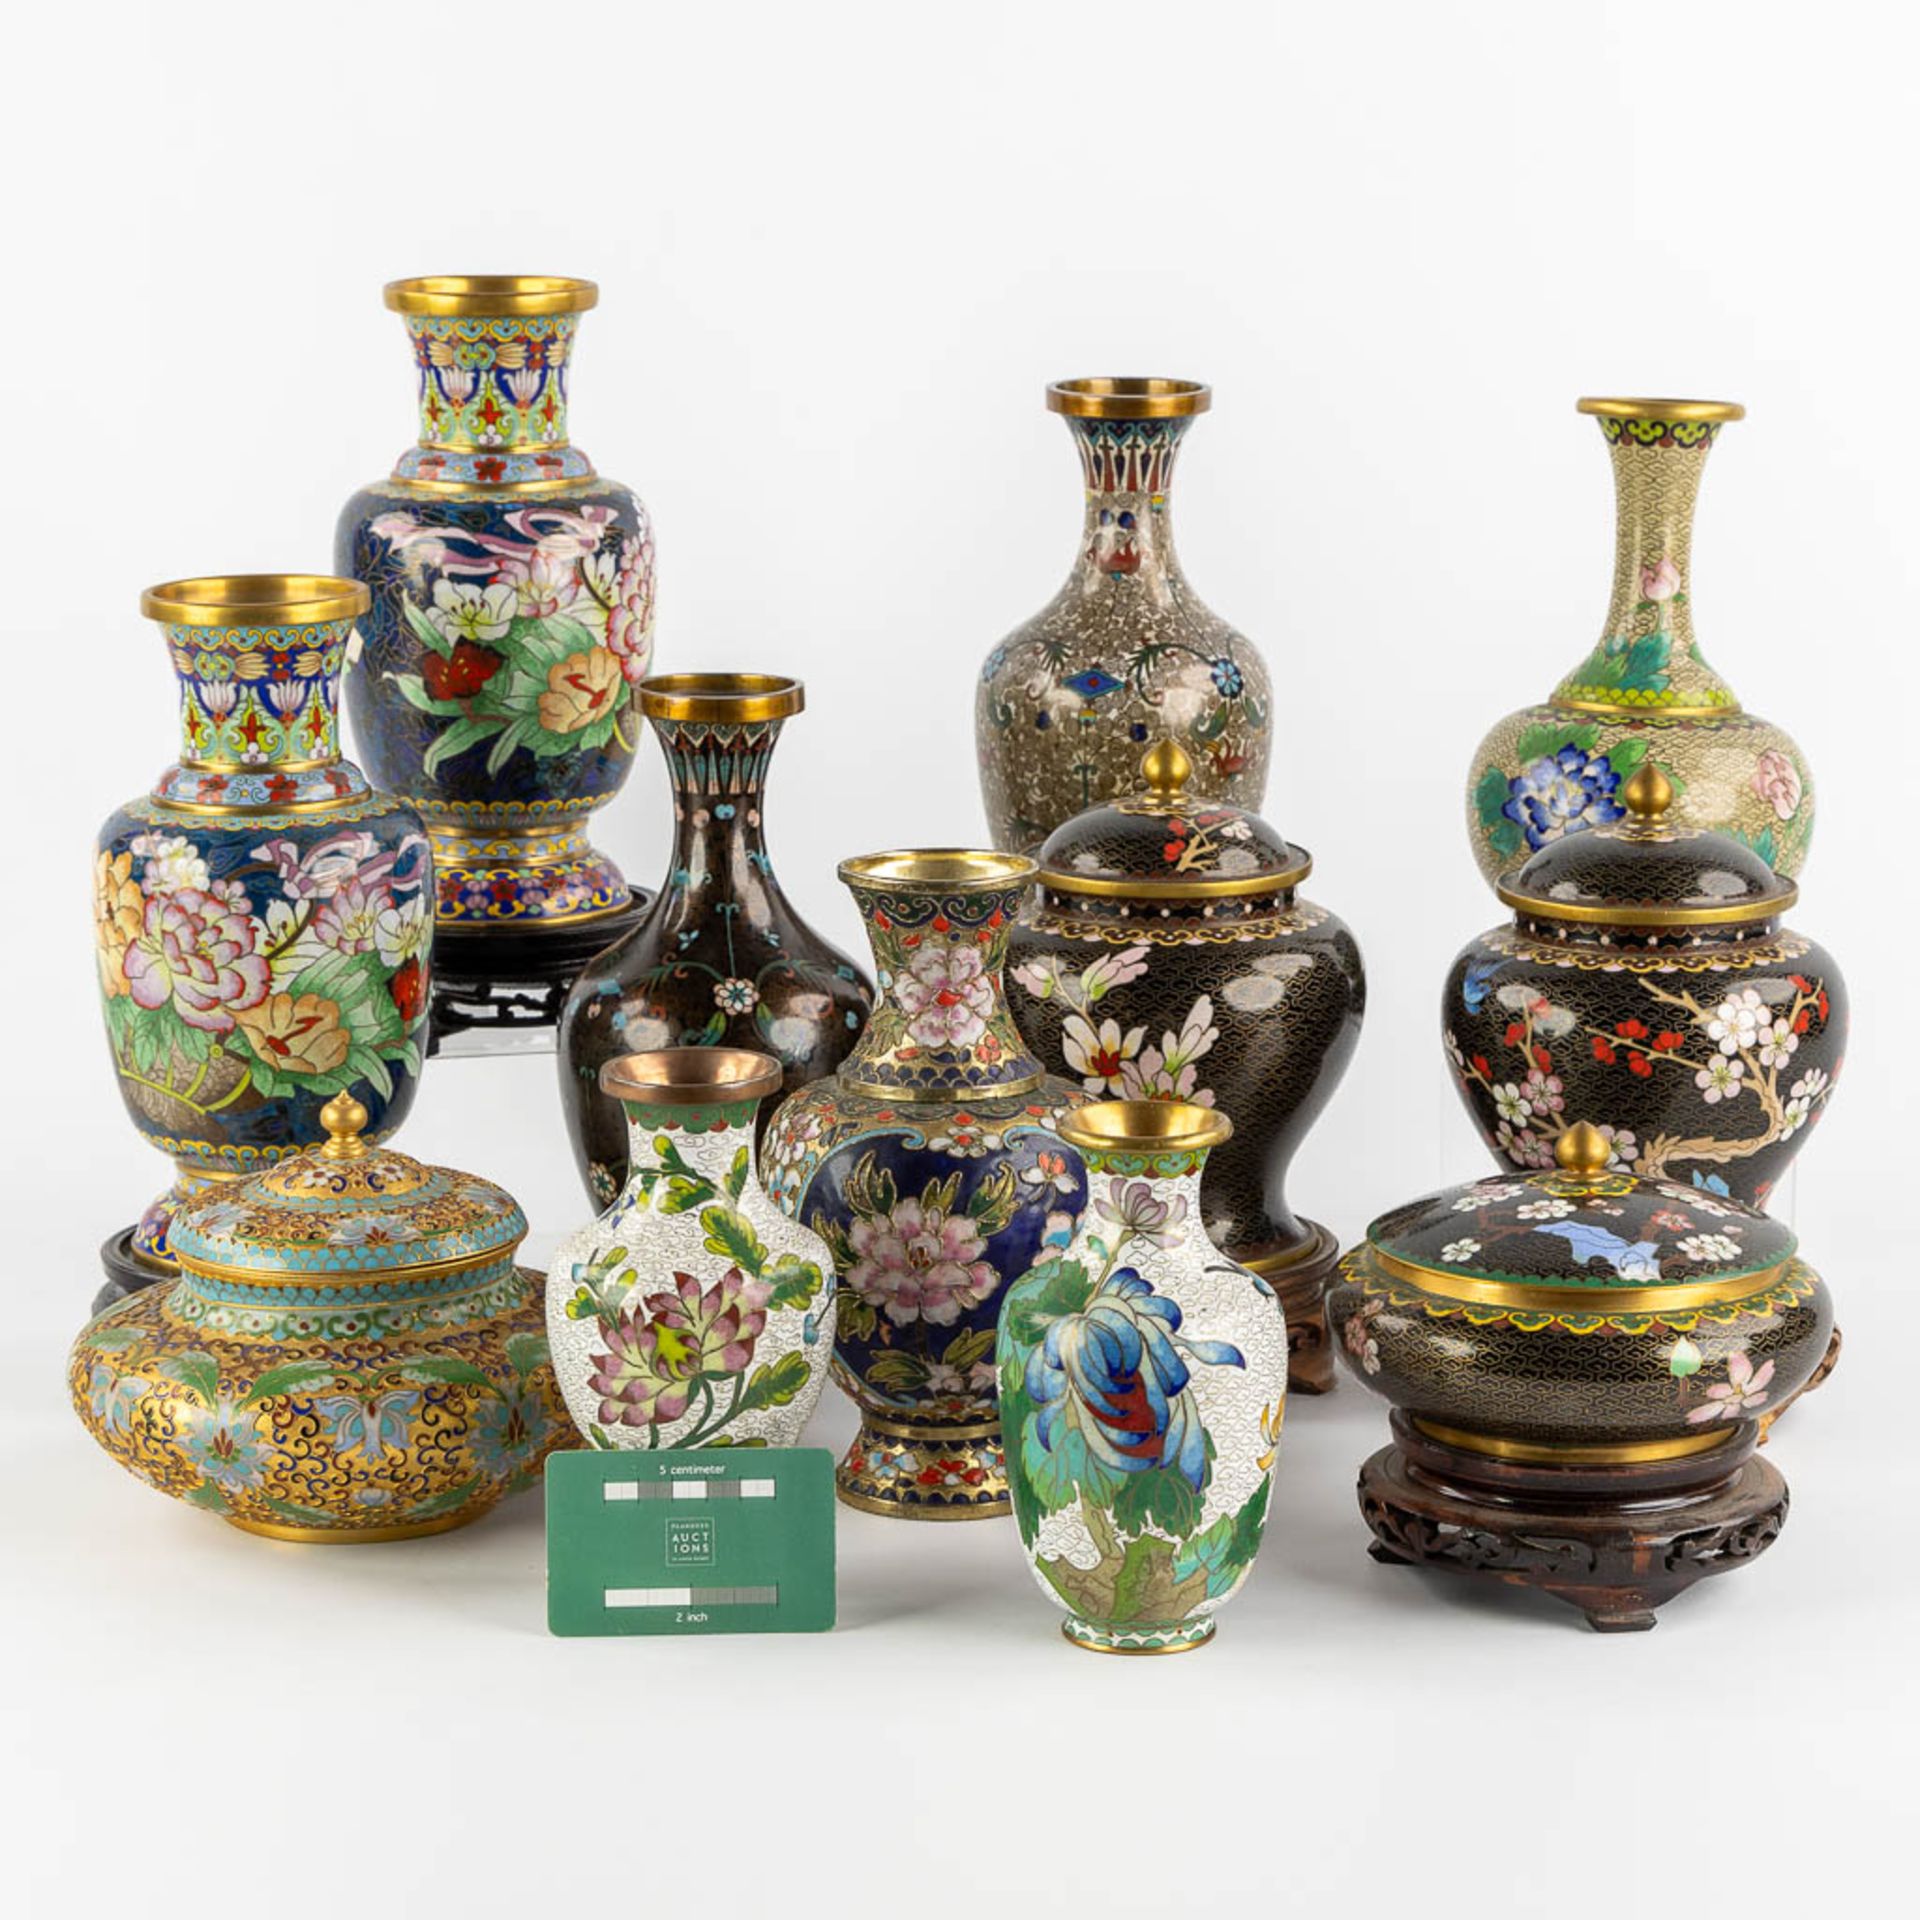 Twelve pieces of Cloisonné enamelled vases and trinklet bowls. Three pairs. (H:23 cm) - Image 2 of 14